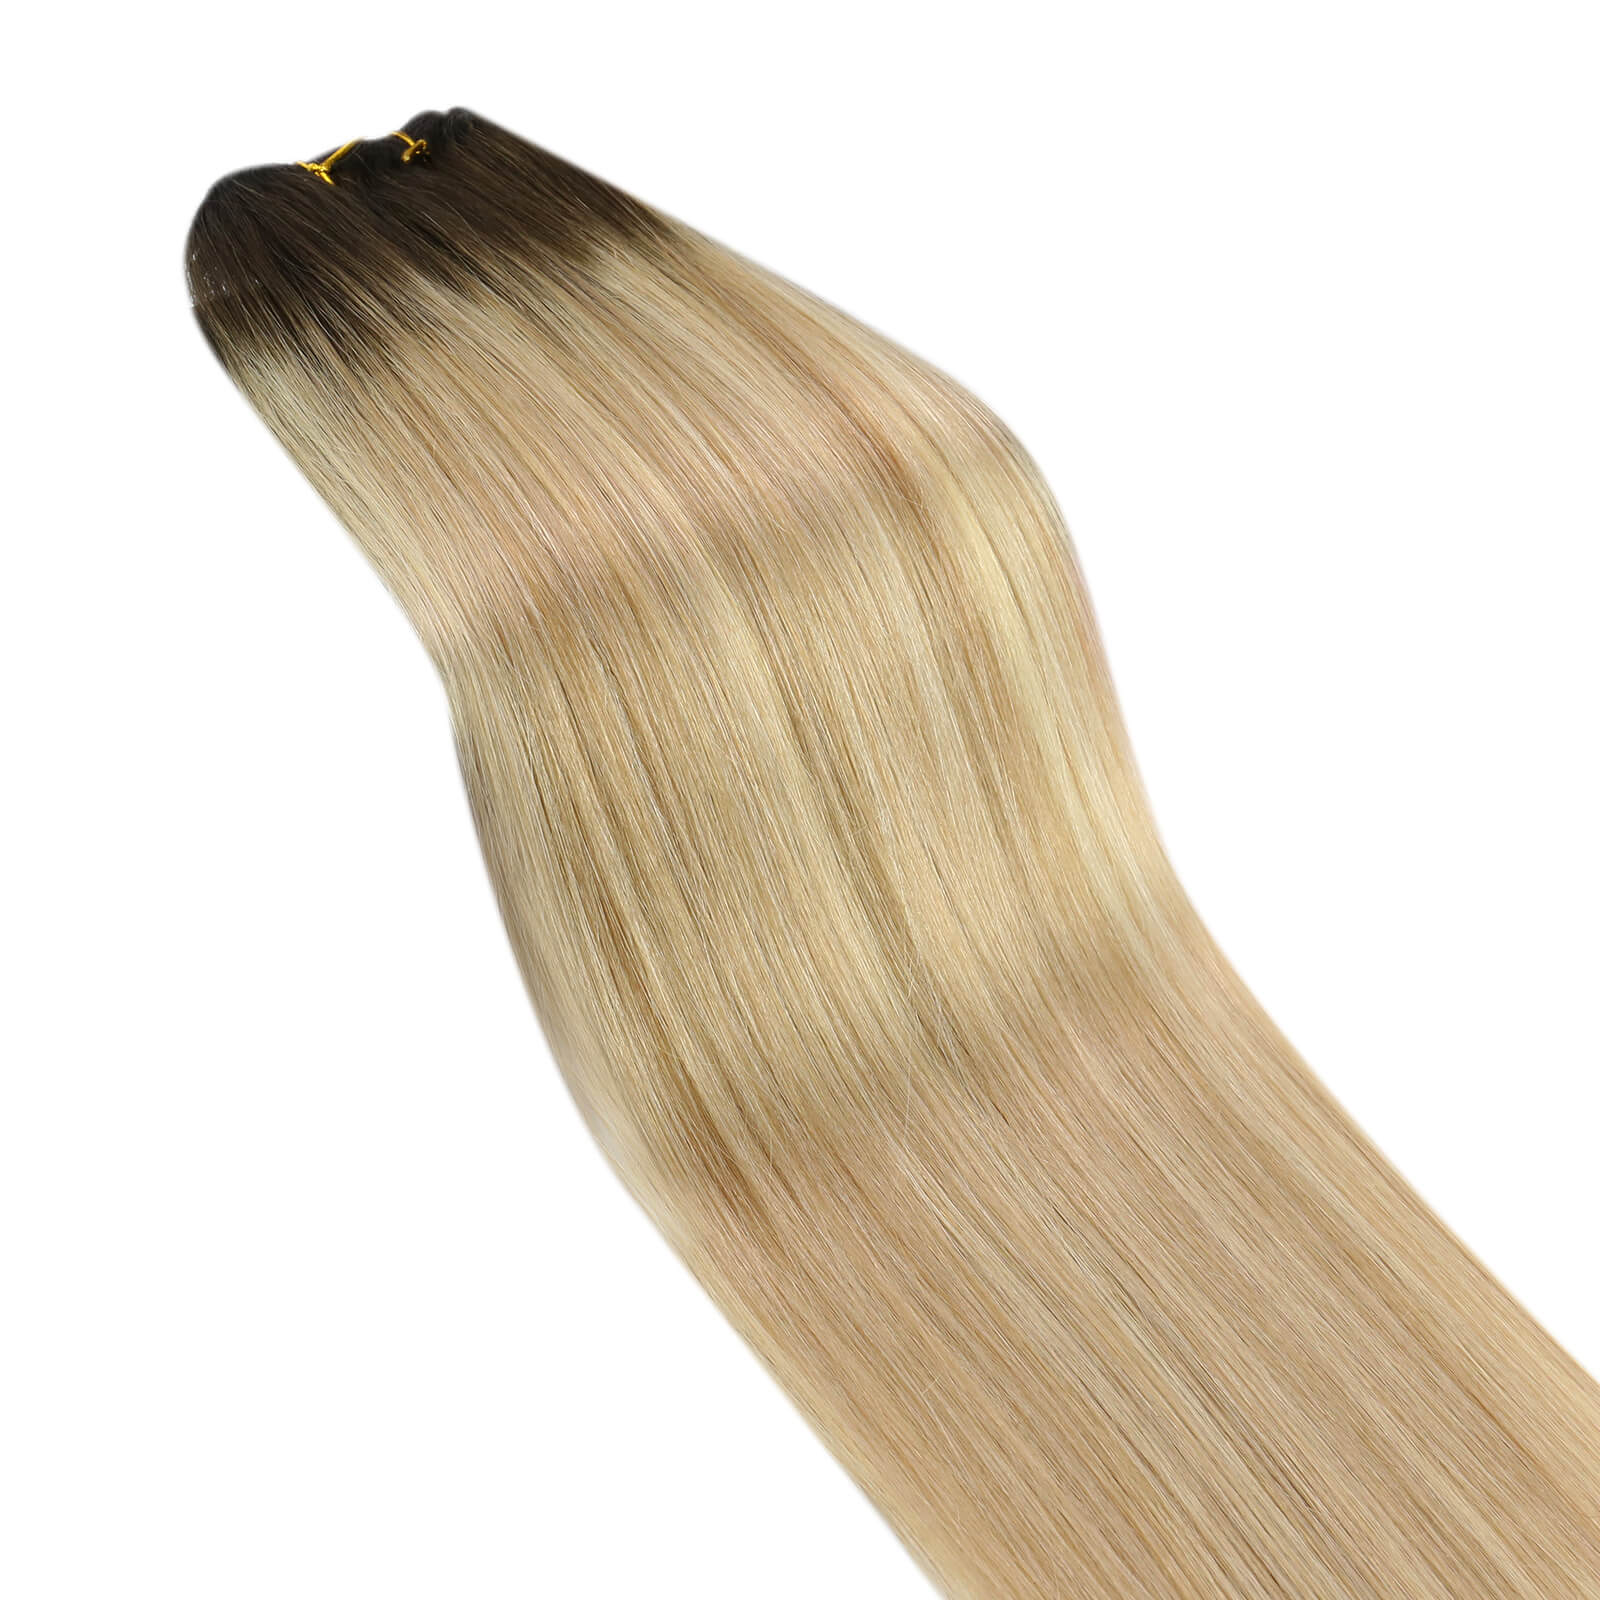 Hair Bundle Human Hair Remy Hair High Quality Ombre Brown with Blonde 3/8/22